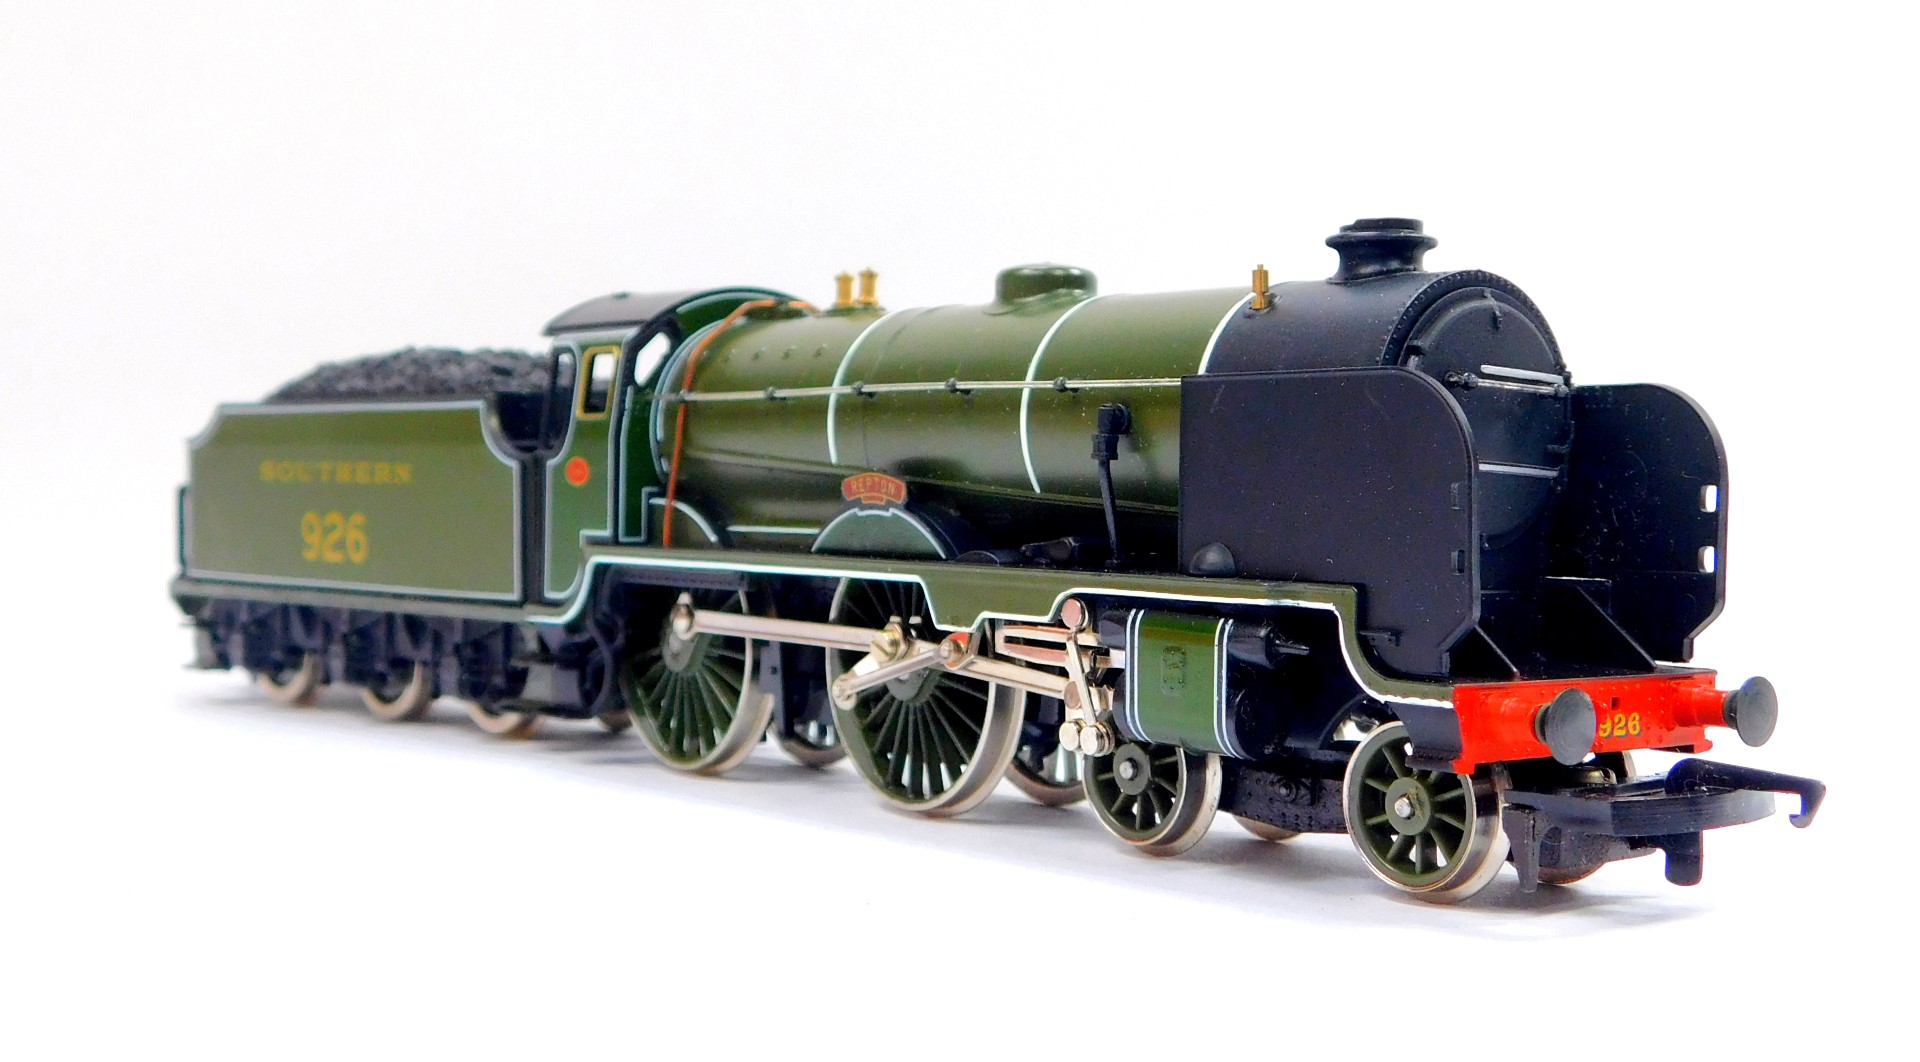 A Hornby OO-gauge locomotive and tender 'Repton', Schools Class V, Southern Railways green livery, - Image 5 of 7